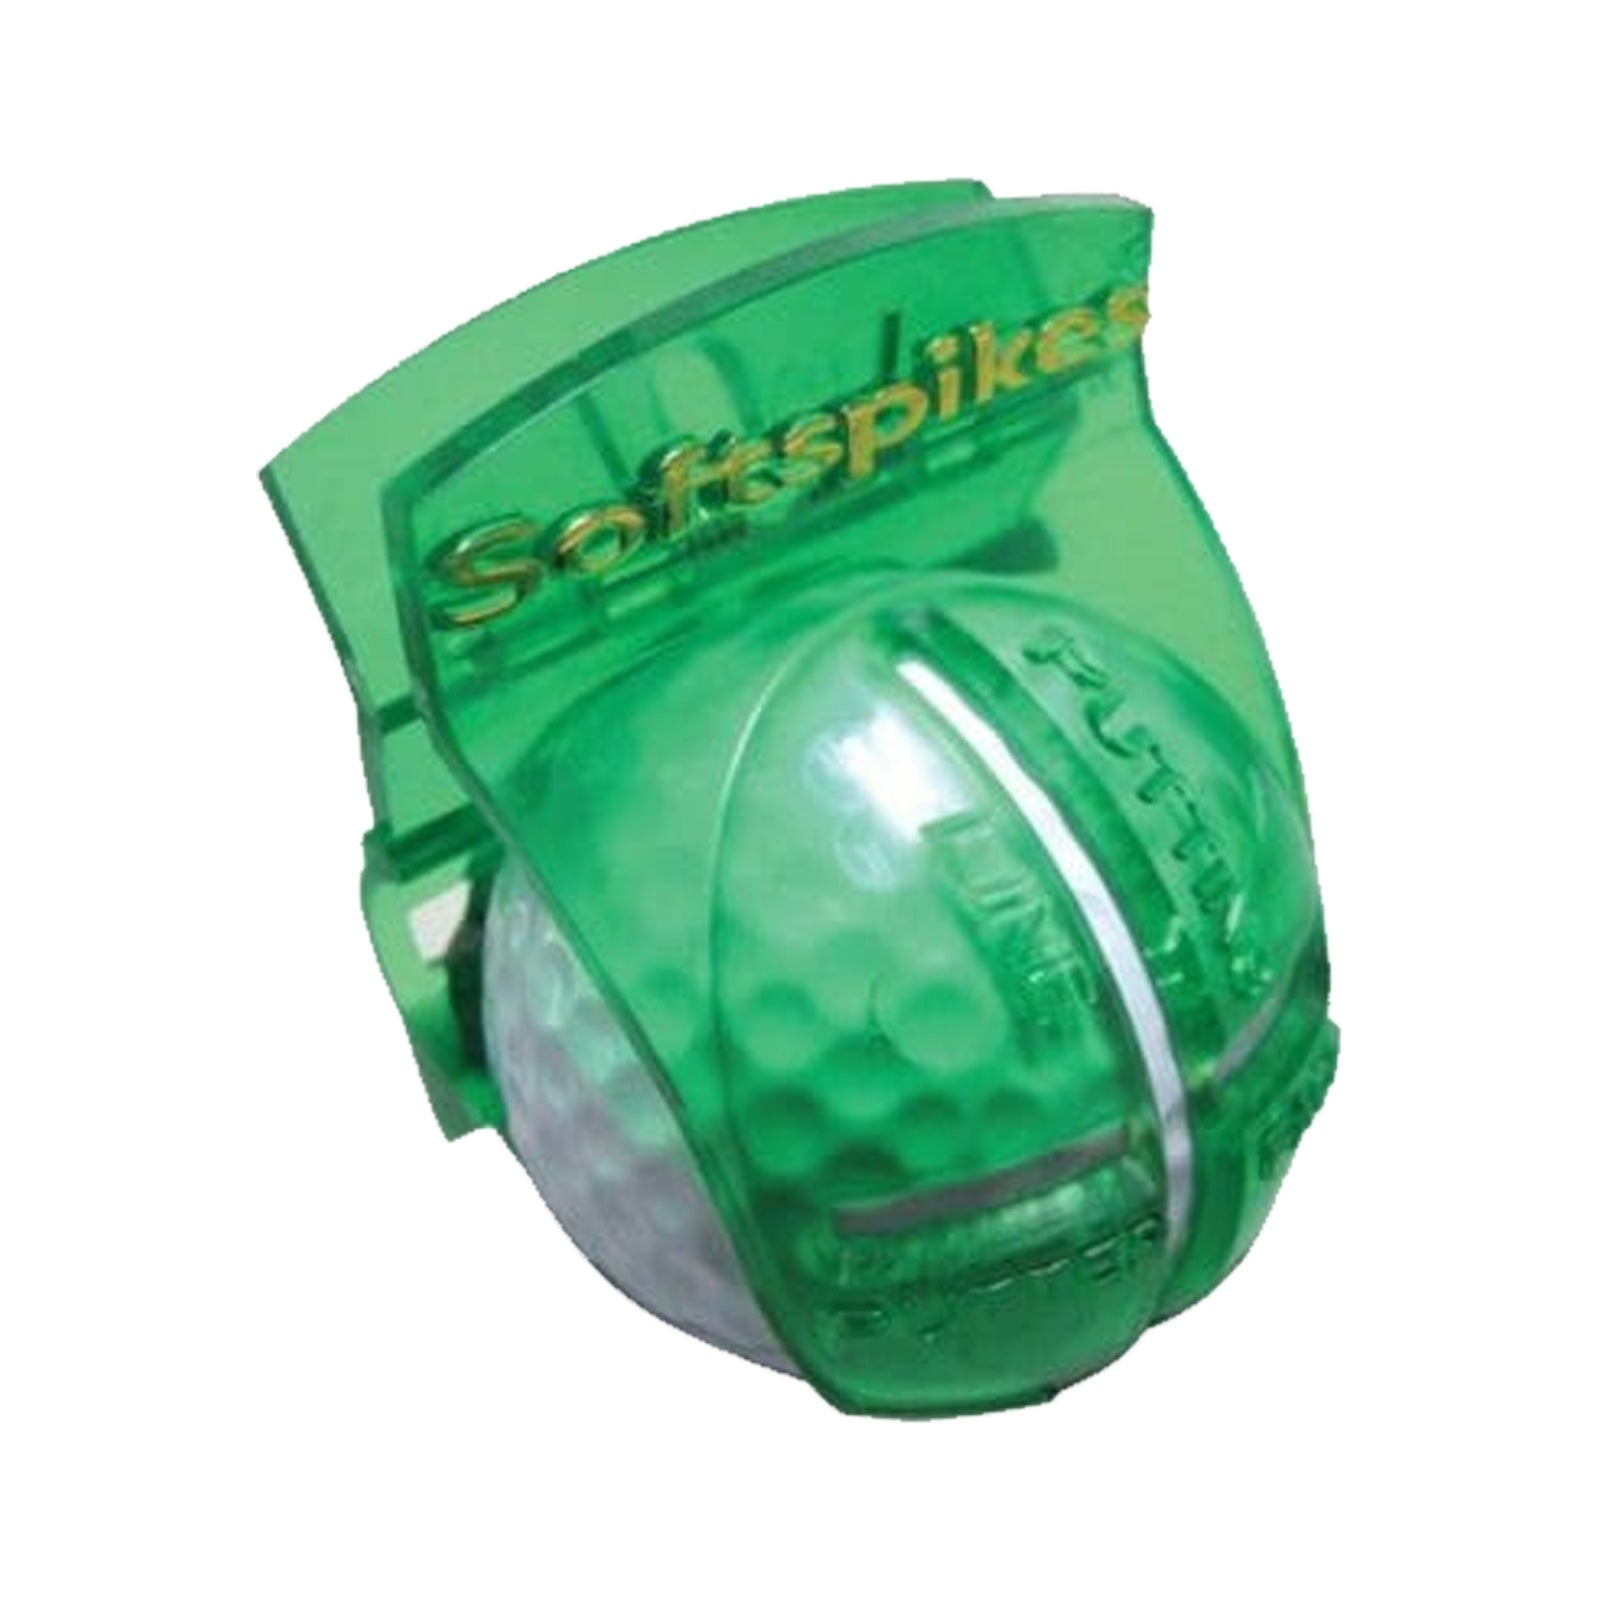 SoftSpikes Golf Ball Alignment Marker Tool